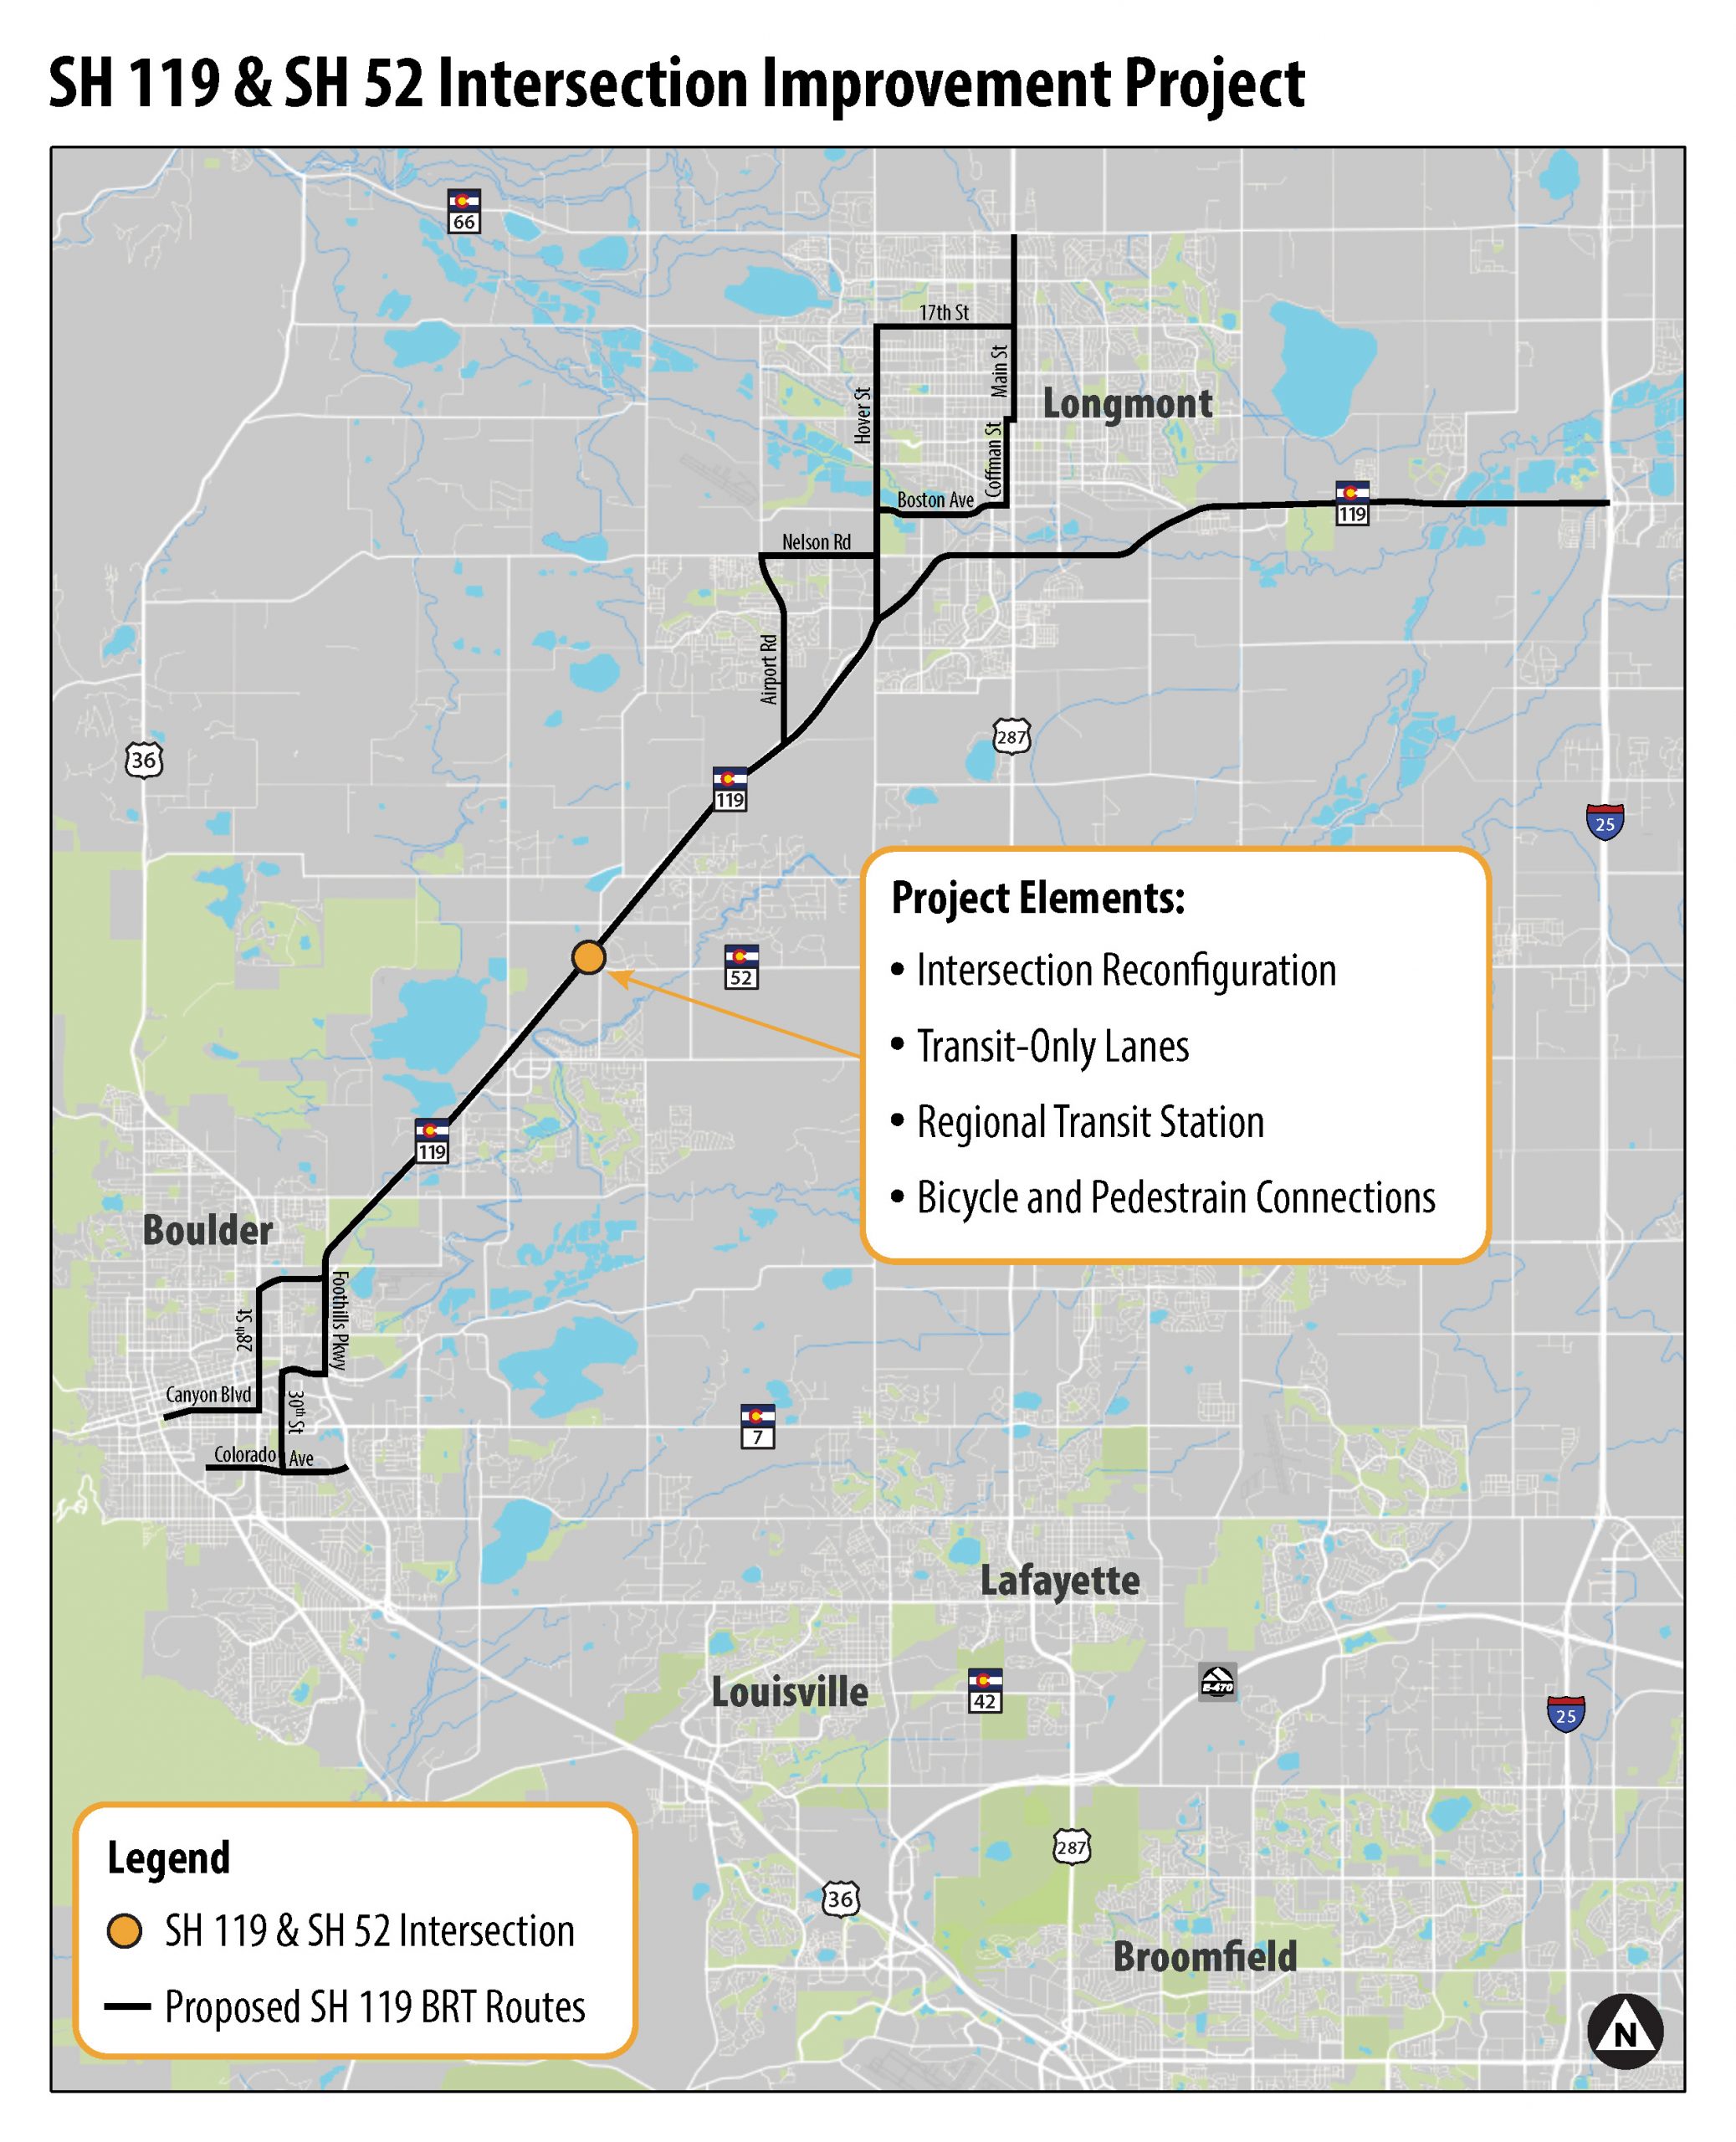 Map showing project elements for the SH 119 and SH 52 intersection improvement project